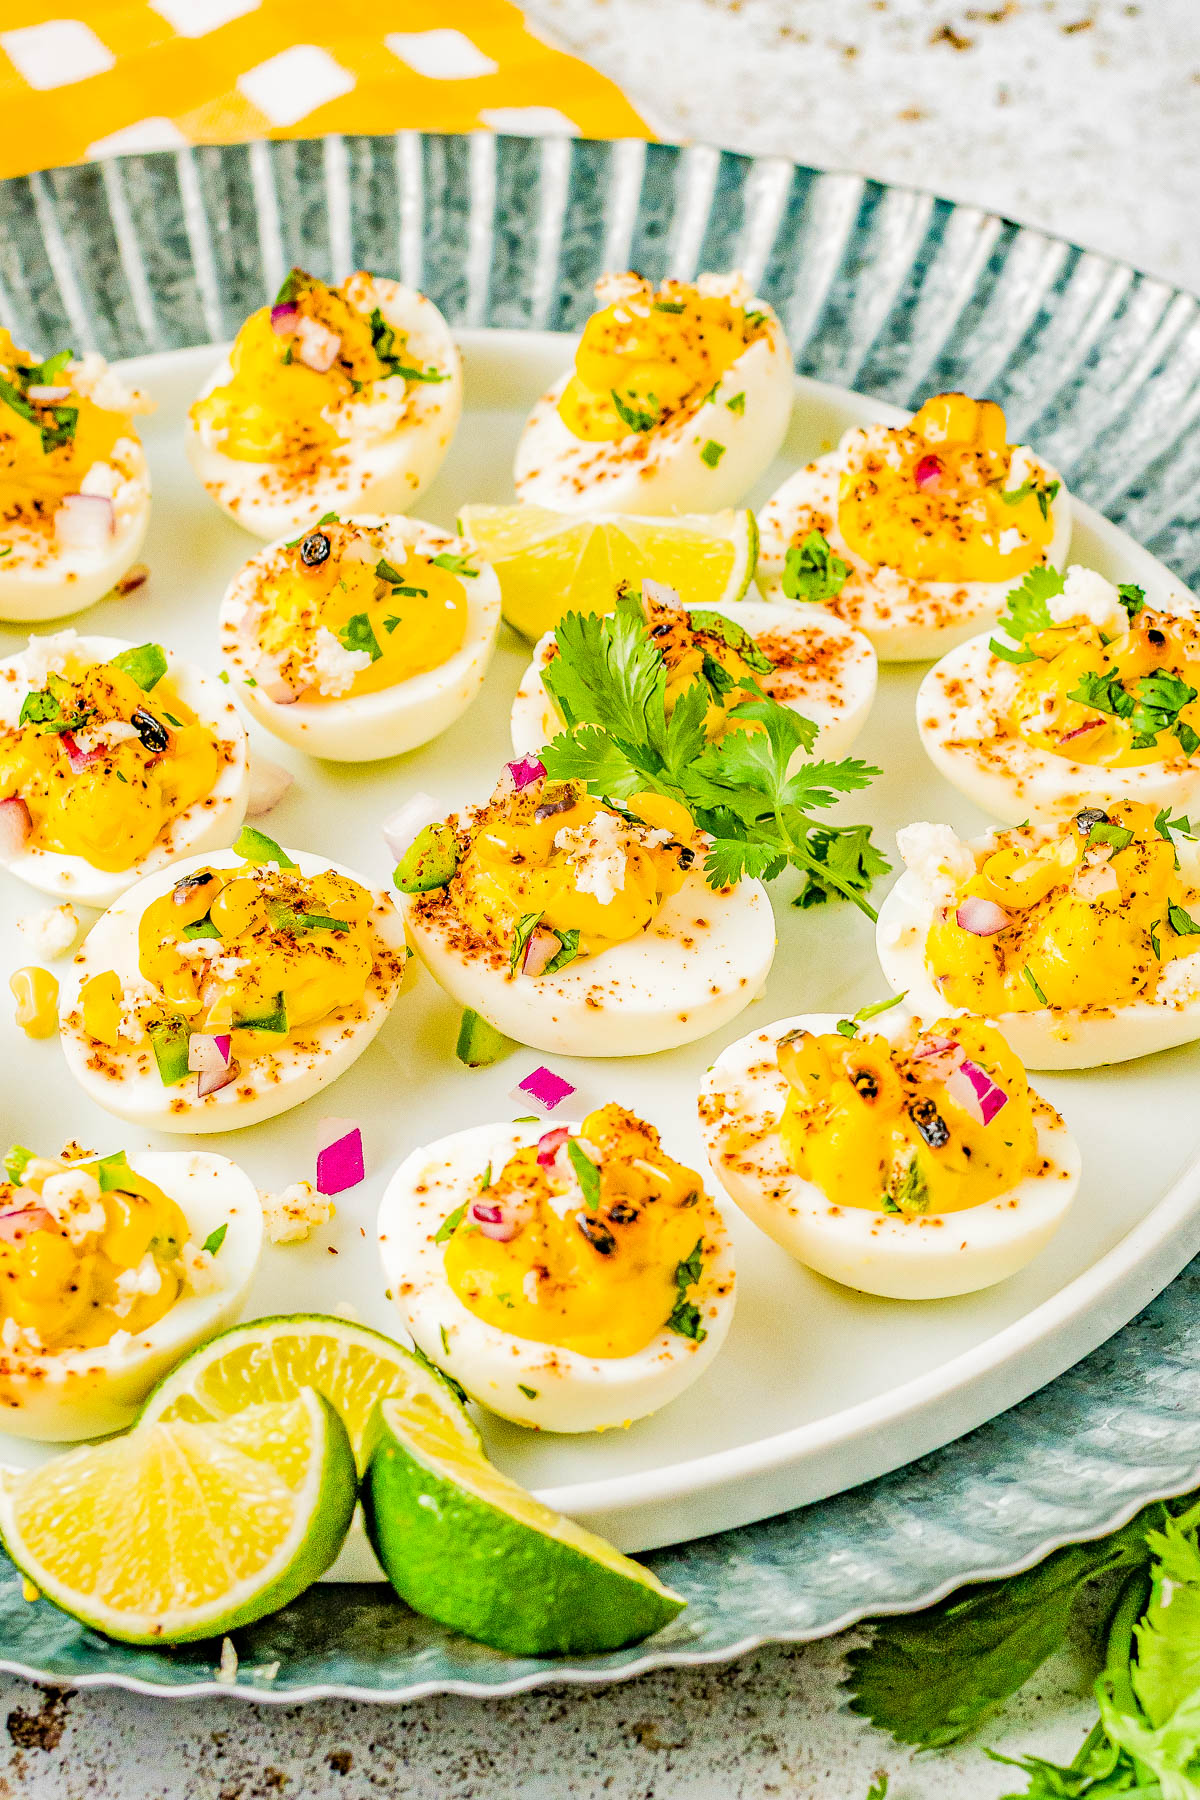 Mexican Street Corn Deviled Eggs - Deviled eggs get a south-of-the-border makeover by incorporating grilled Mexican street corn, jalapeno, red onion, cilantro, lime juice, queso fresco, and chili powder! This is an EASY appetizer or picnic recipe that everyone adores! Serve these at your next summer event including Memorial Day, Father's Day, Fourth of July, or make them for game day parties! 